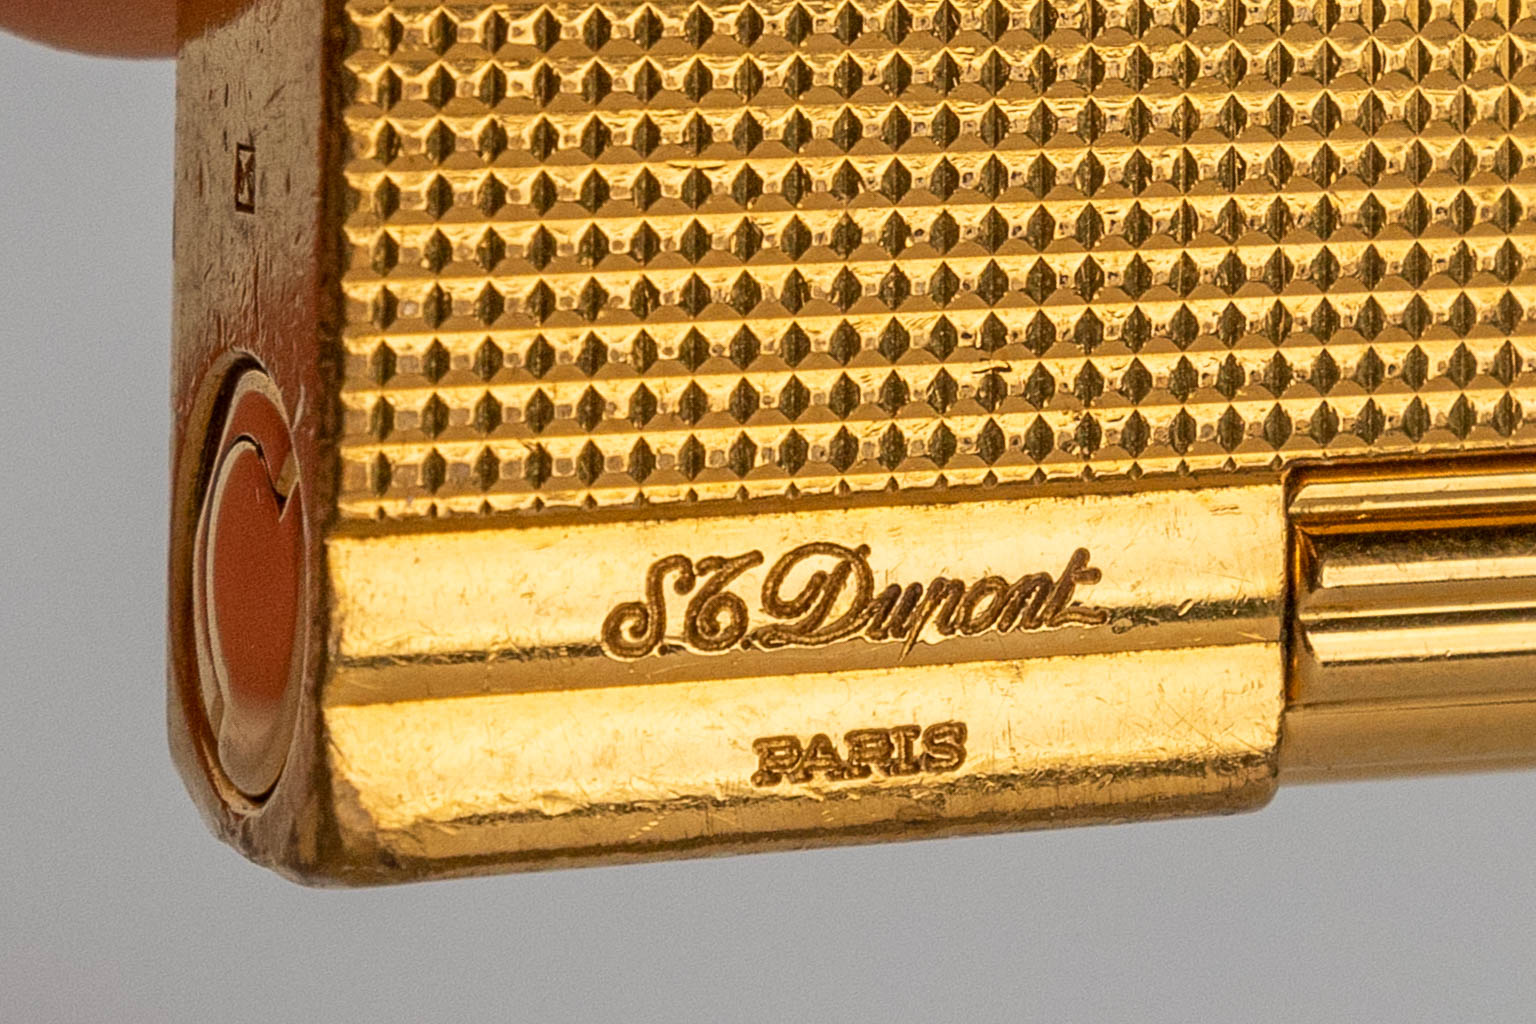 Dupont S.A. two vintage lighters. Gold-plated and silver-plated. (D:1,2 x W:3,7 x H:6,2 cm)